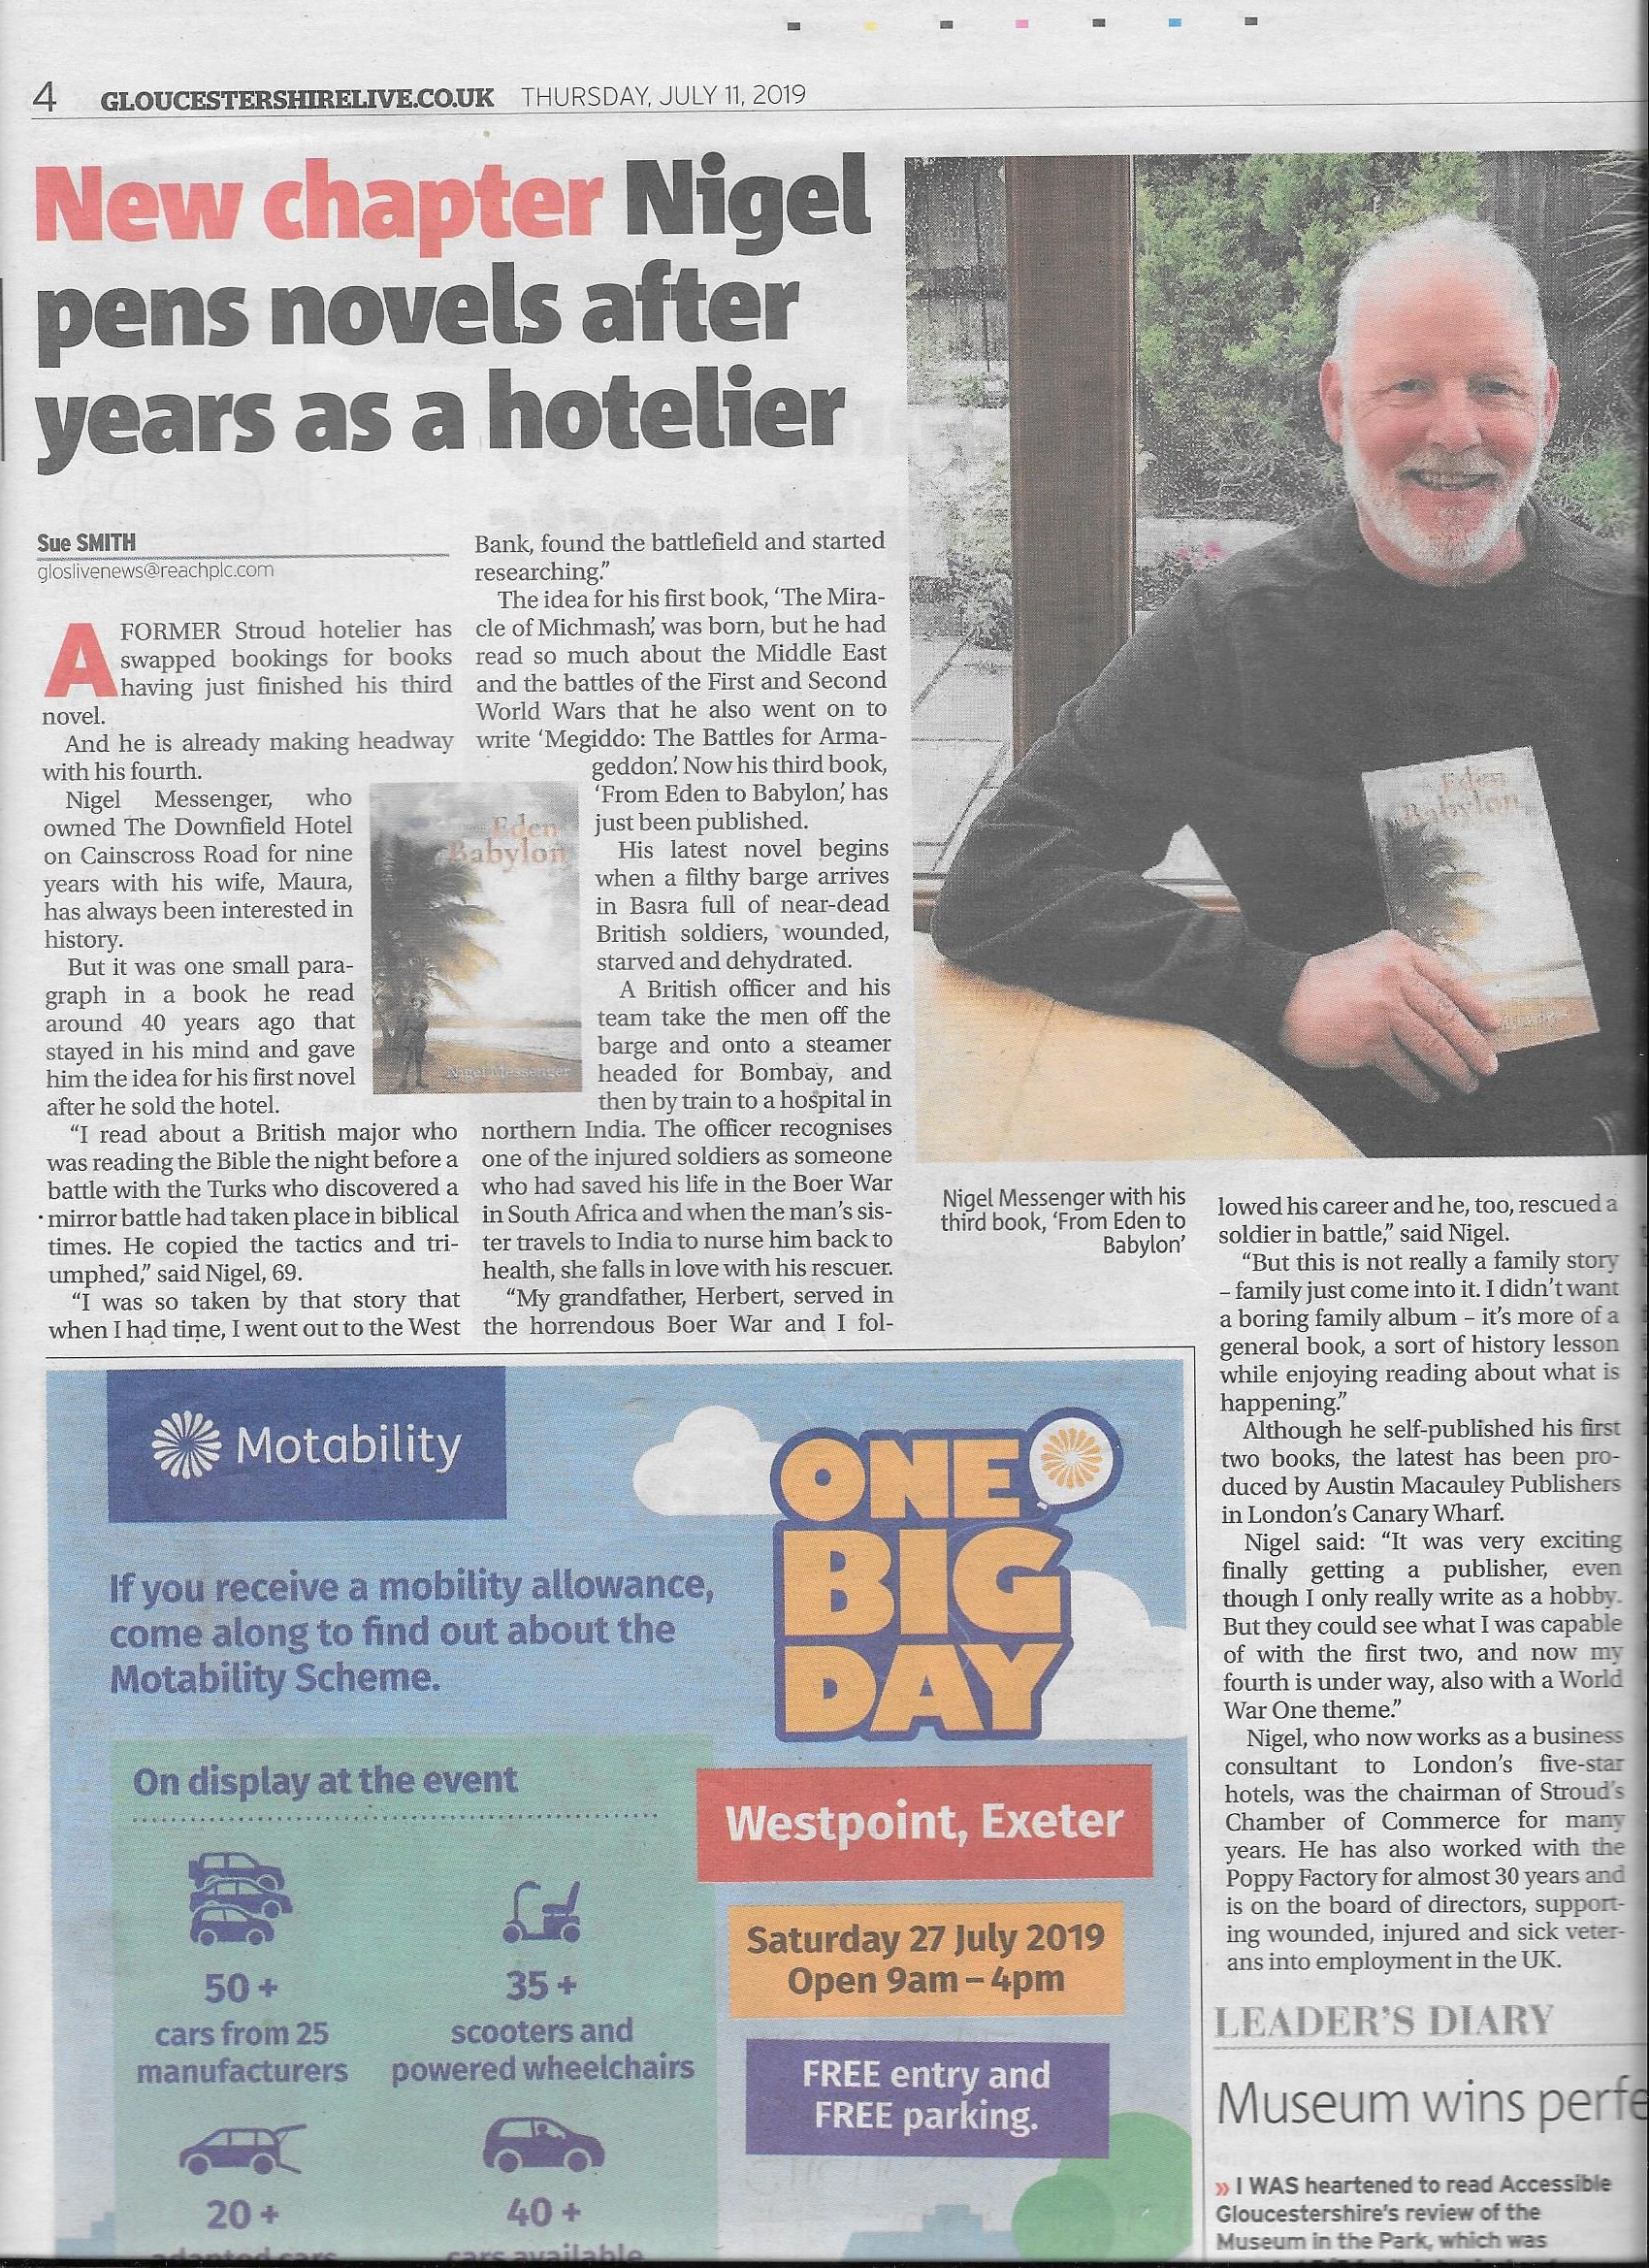 The Newspaper Gloucester Shire Live Featured the Author Nigel Messenger